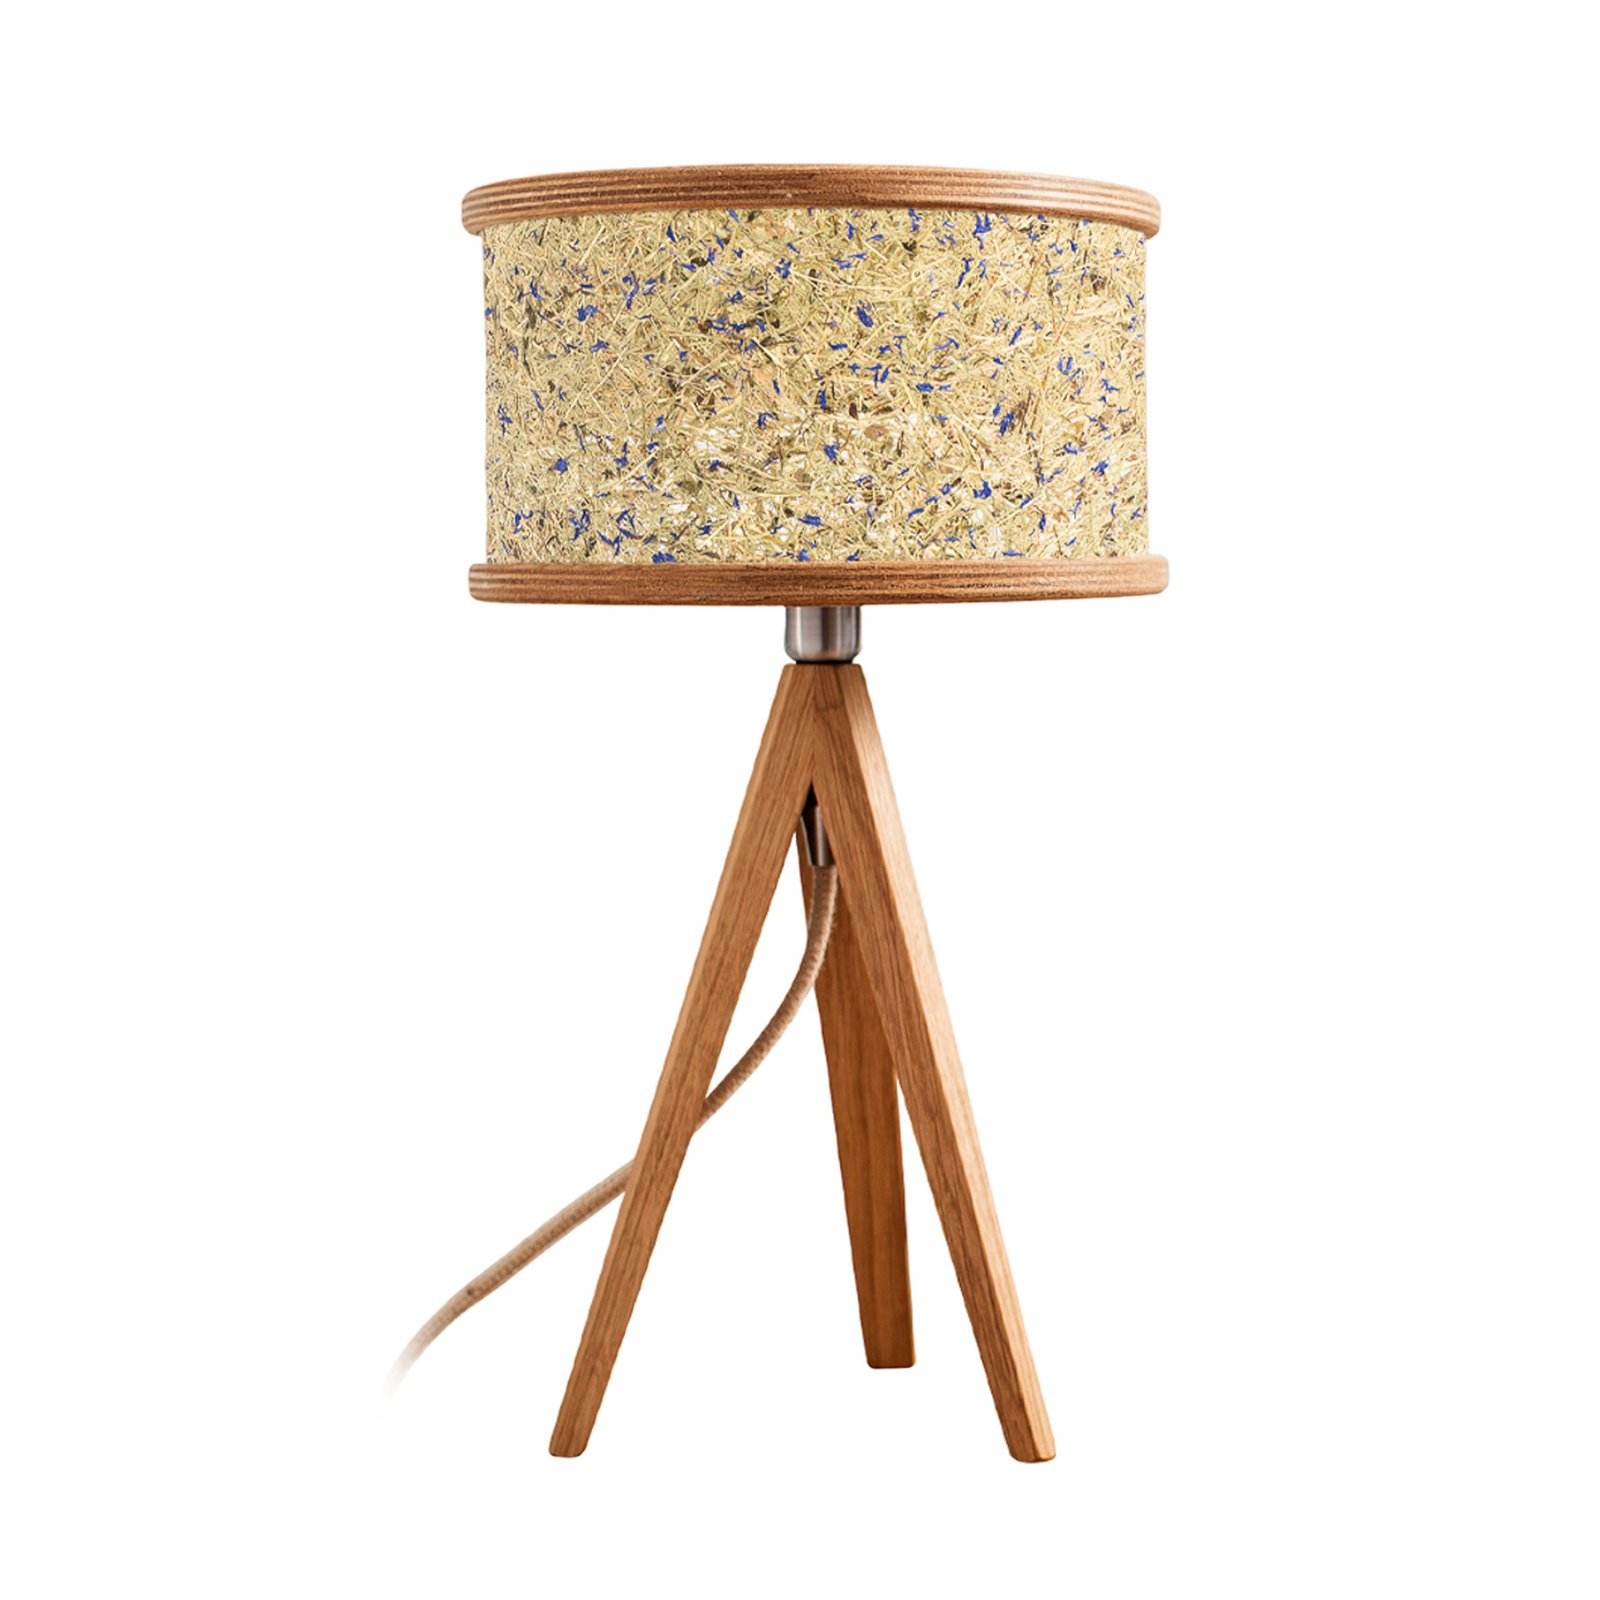 ALMUT 2610 table lamp, hay with blue cornflowers